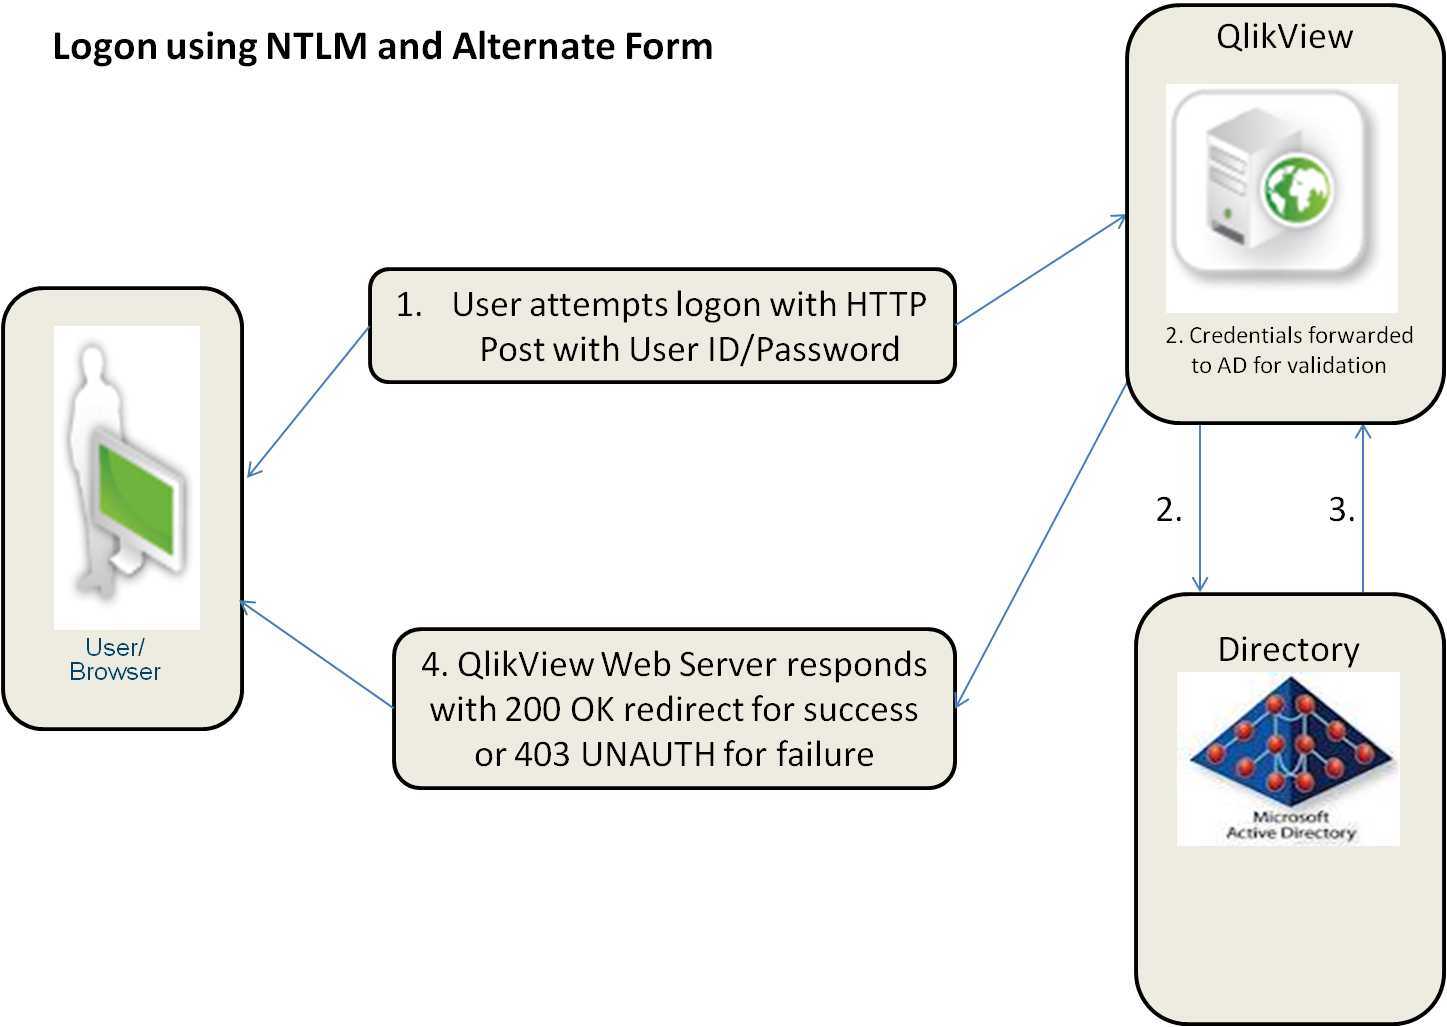 First, the user attempts logon with HTTP Post with the user ID and password. Second, the credentials are forwarded to the active directory for validation. Third, the QlikView Web Server responds with 200 OK redirect for success or 403 UNAUTH for failure.